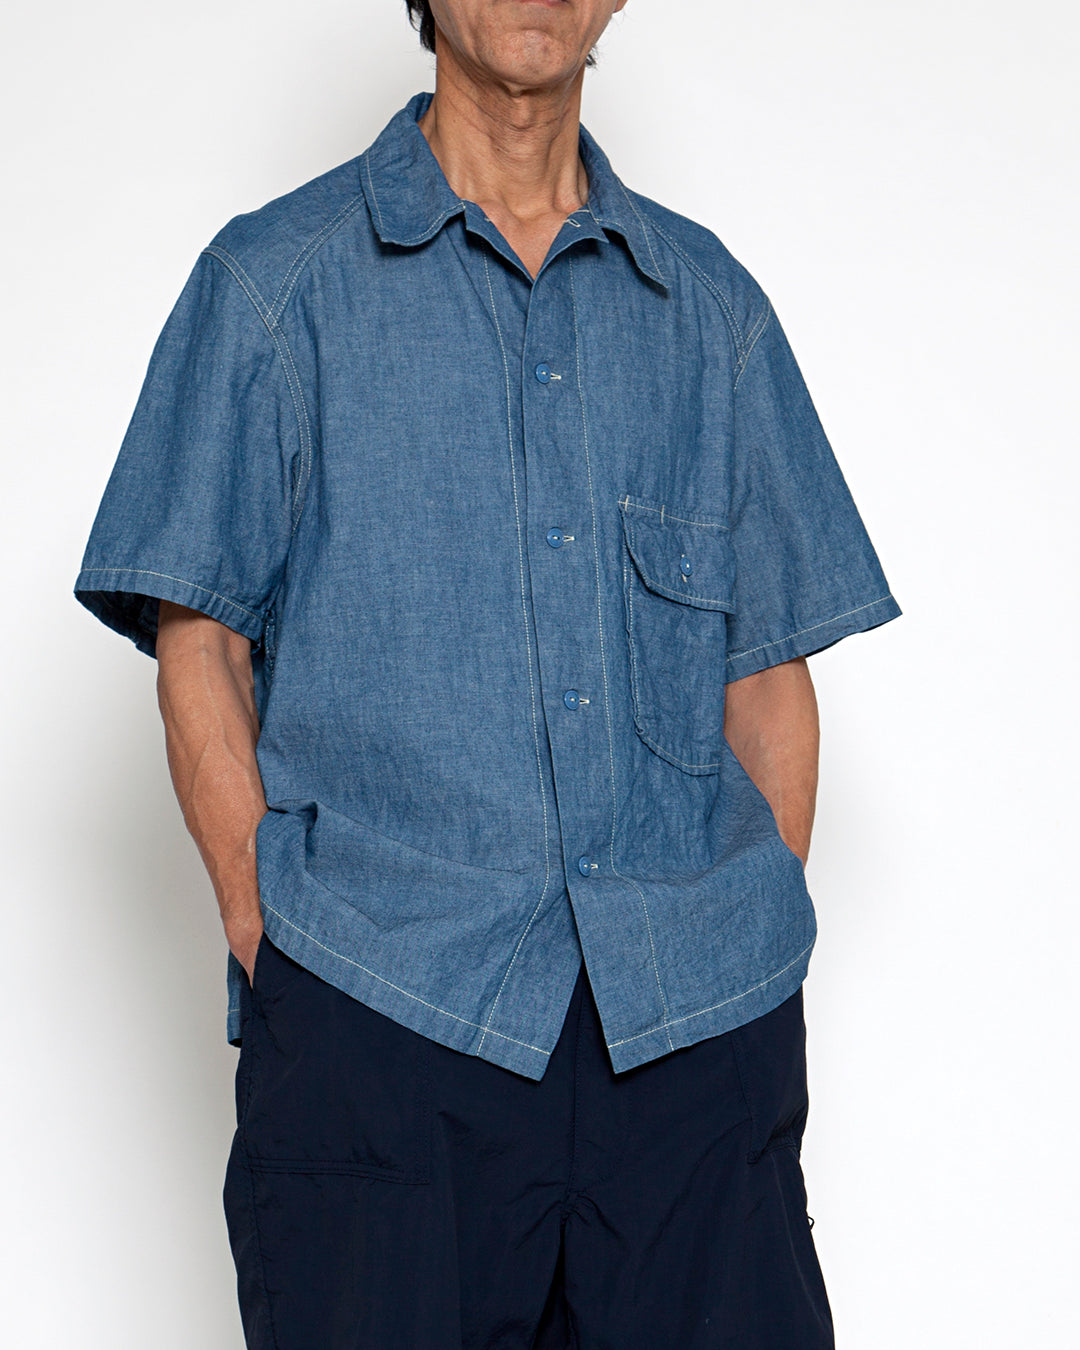 【DELIVERY】THE CORONA UTILITY・CS011S - UTILITY FIELD SHIRT